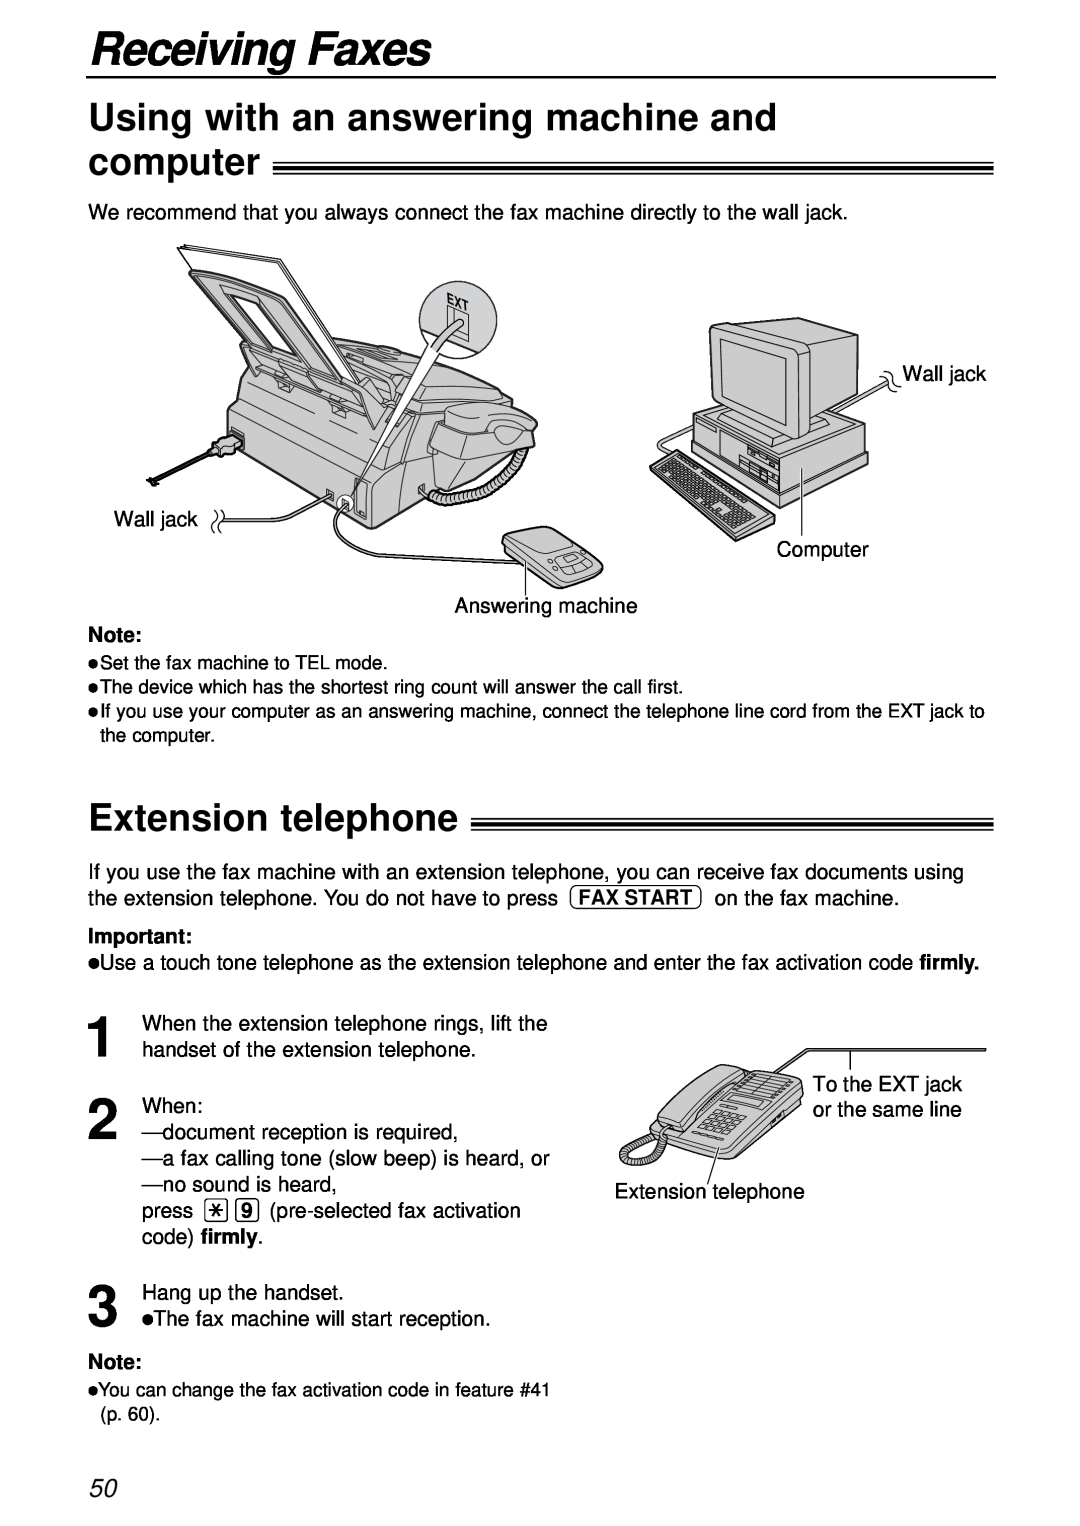 Panasonic KX-FL501AL, KX-FL501NZ manual Using with an answering machine and computer, Extension telephone, Receiving Faxes 